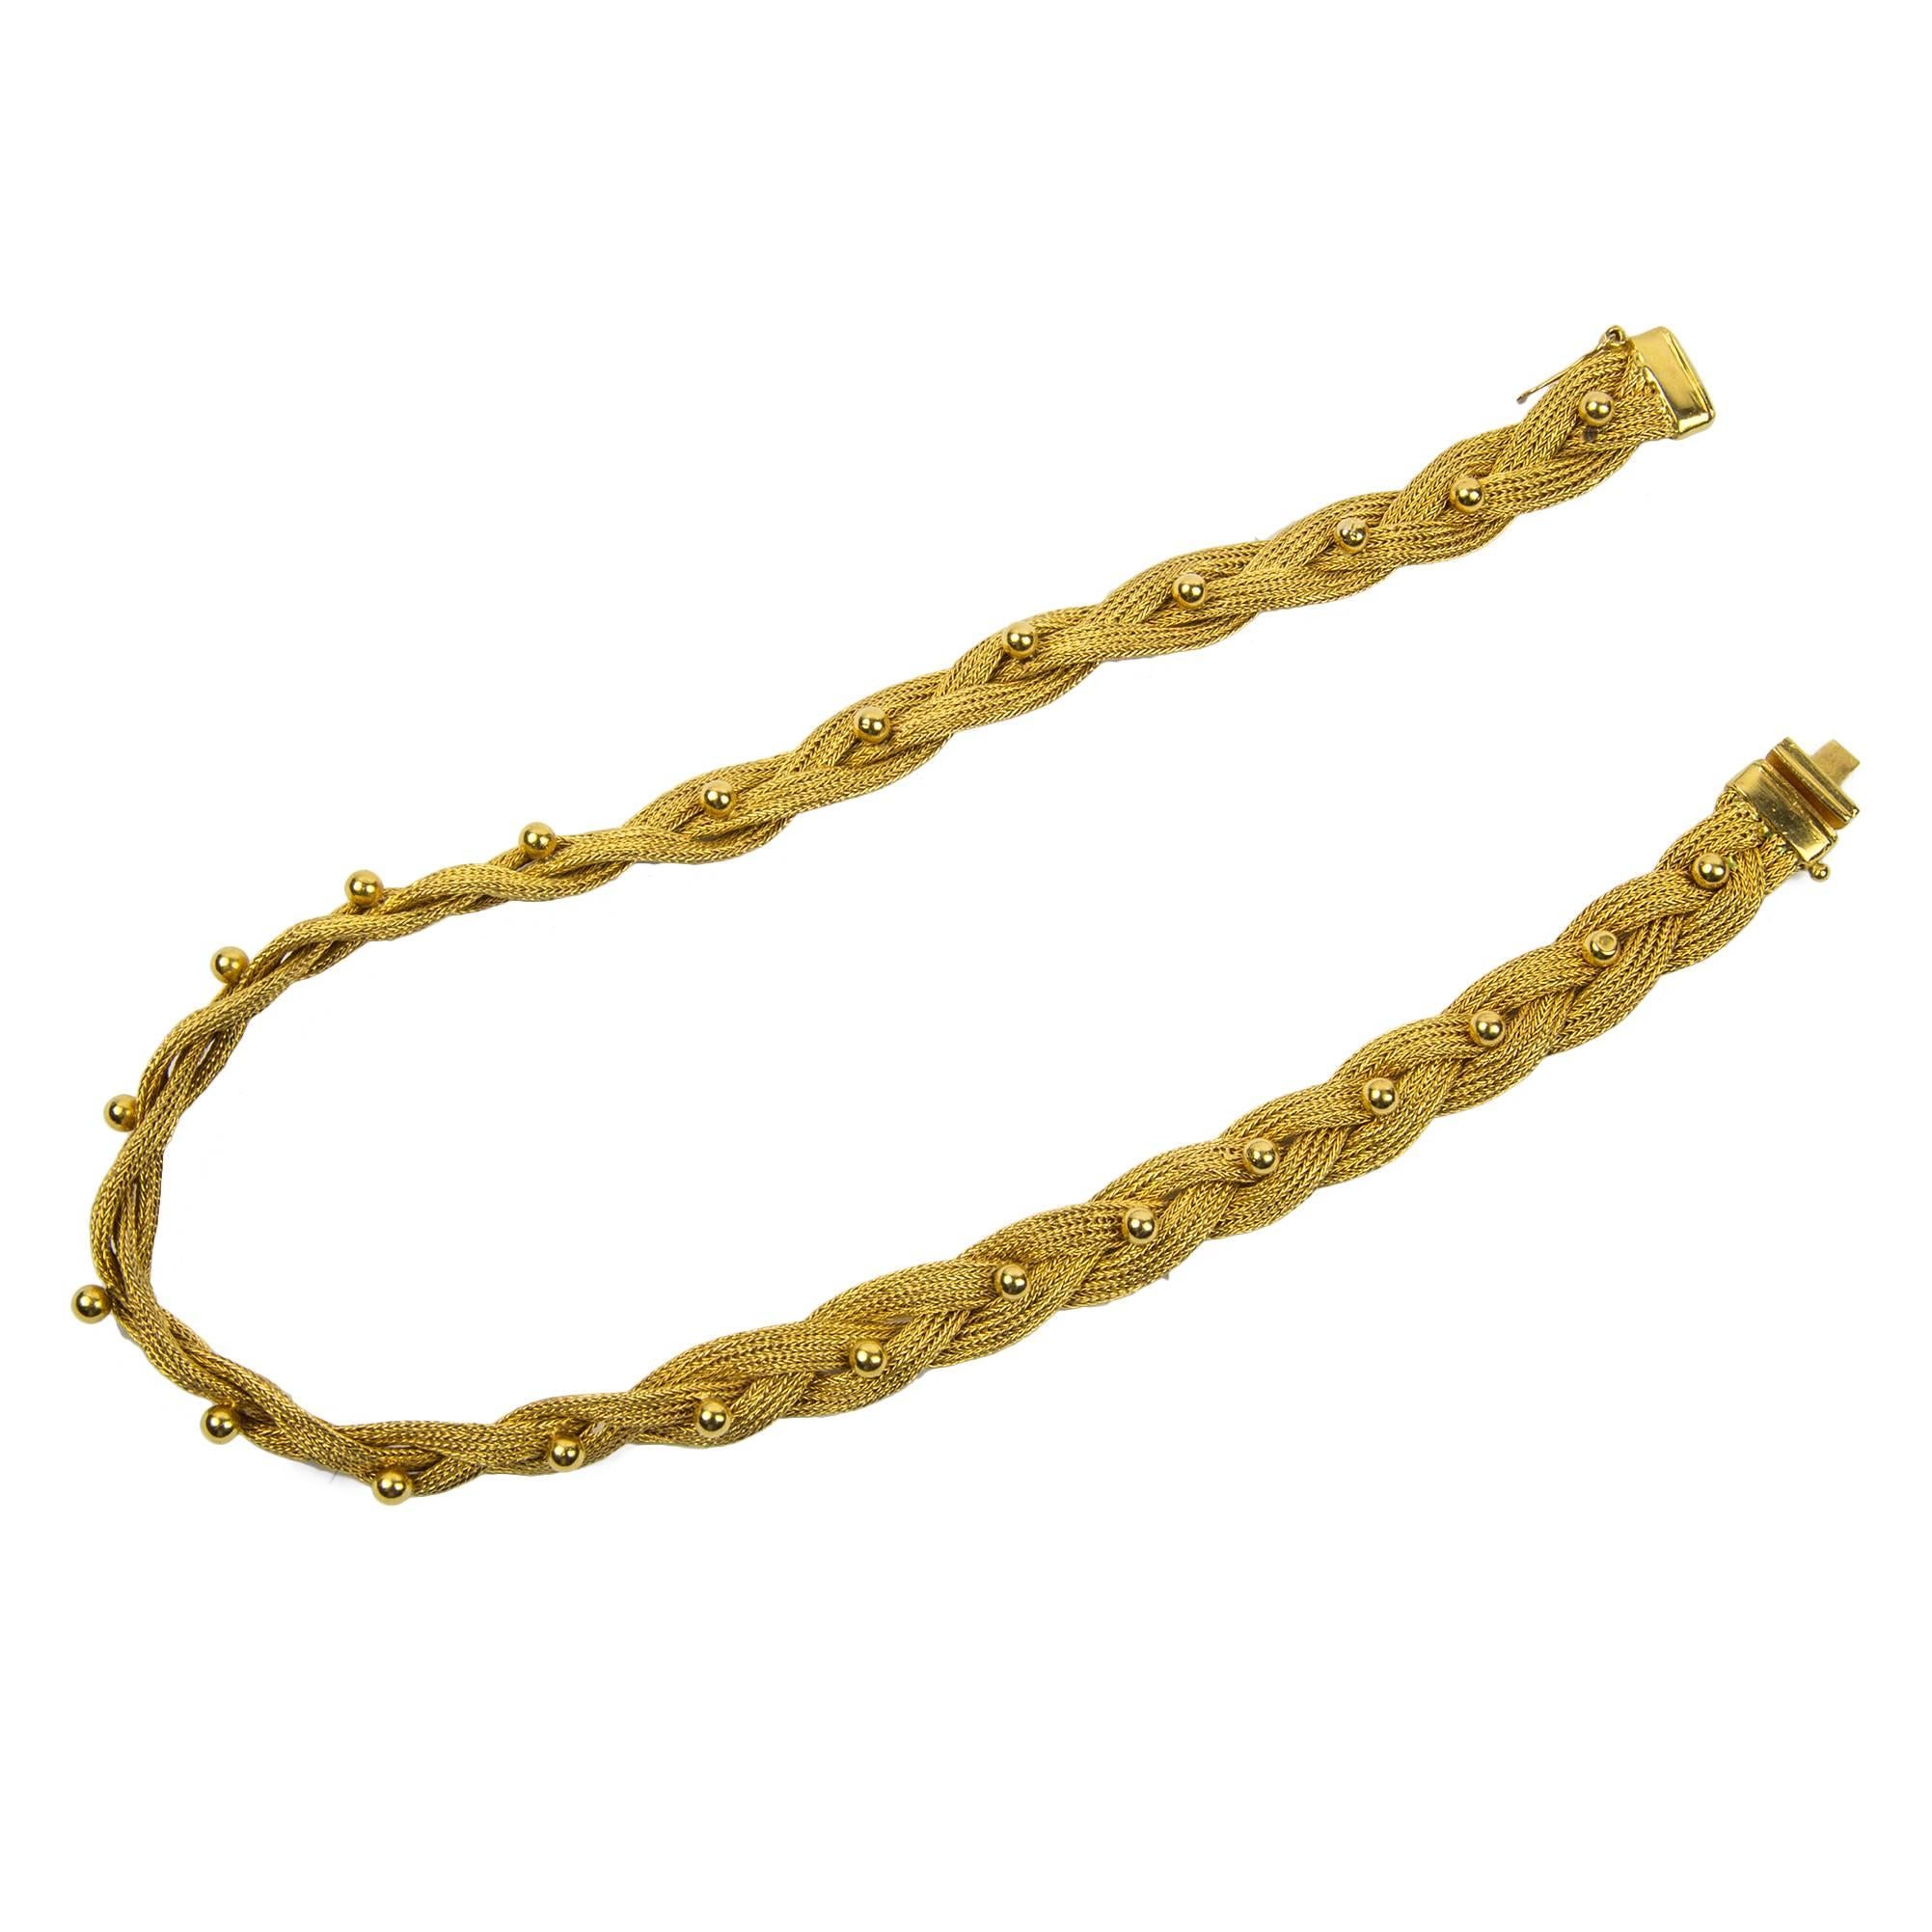 Timeless Mesh Gold Weave Necklace with gold balls, beautifully hand crafted in 22/20ct. secure invisible insertion clasp with a figure ‘8’ safety. Marked: B.C.S 252; 22/20 M; balls measure approx. 3.75mm in diameter; approx. total item weight: 57.08